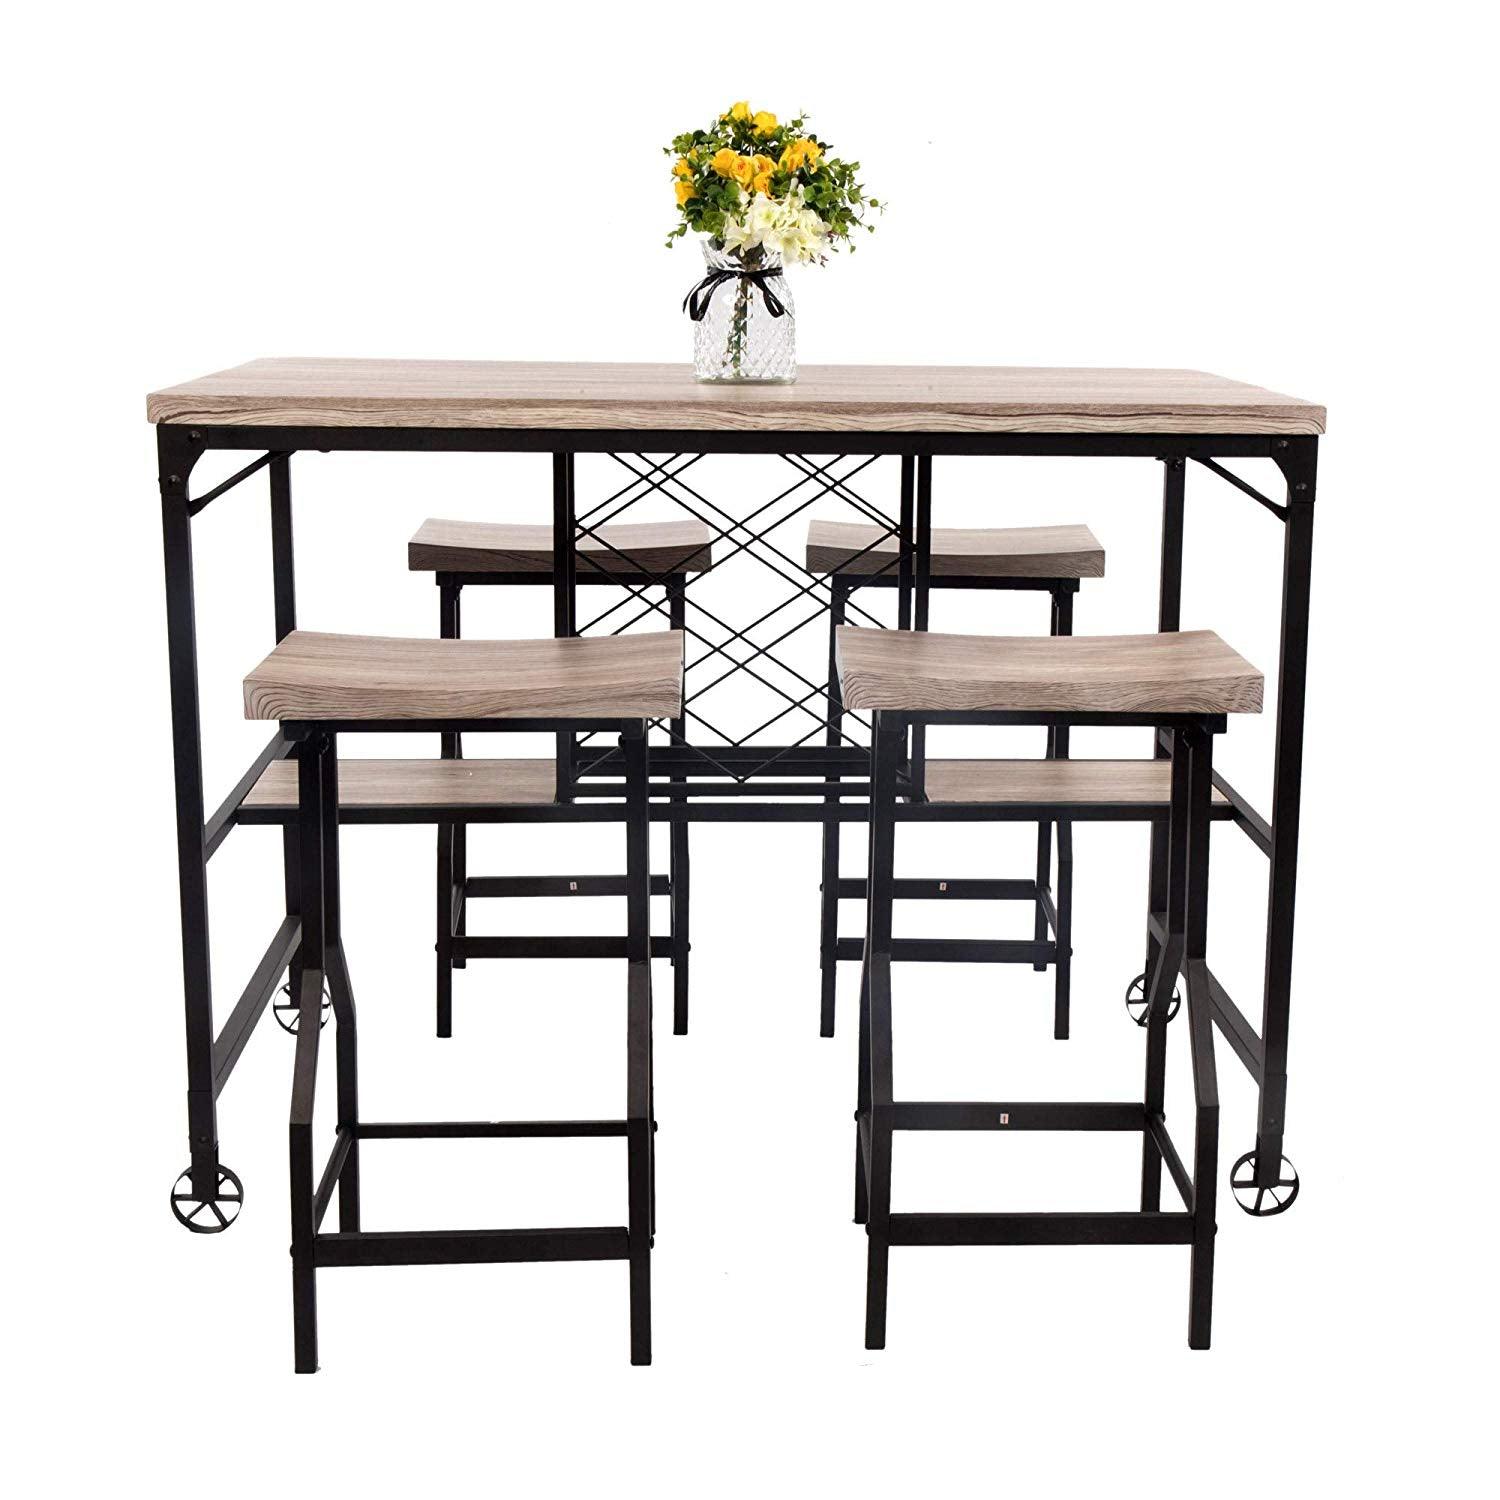 Bosonshop 5-Piece Dining Table Set with Metal Legs, Industrial Style